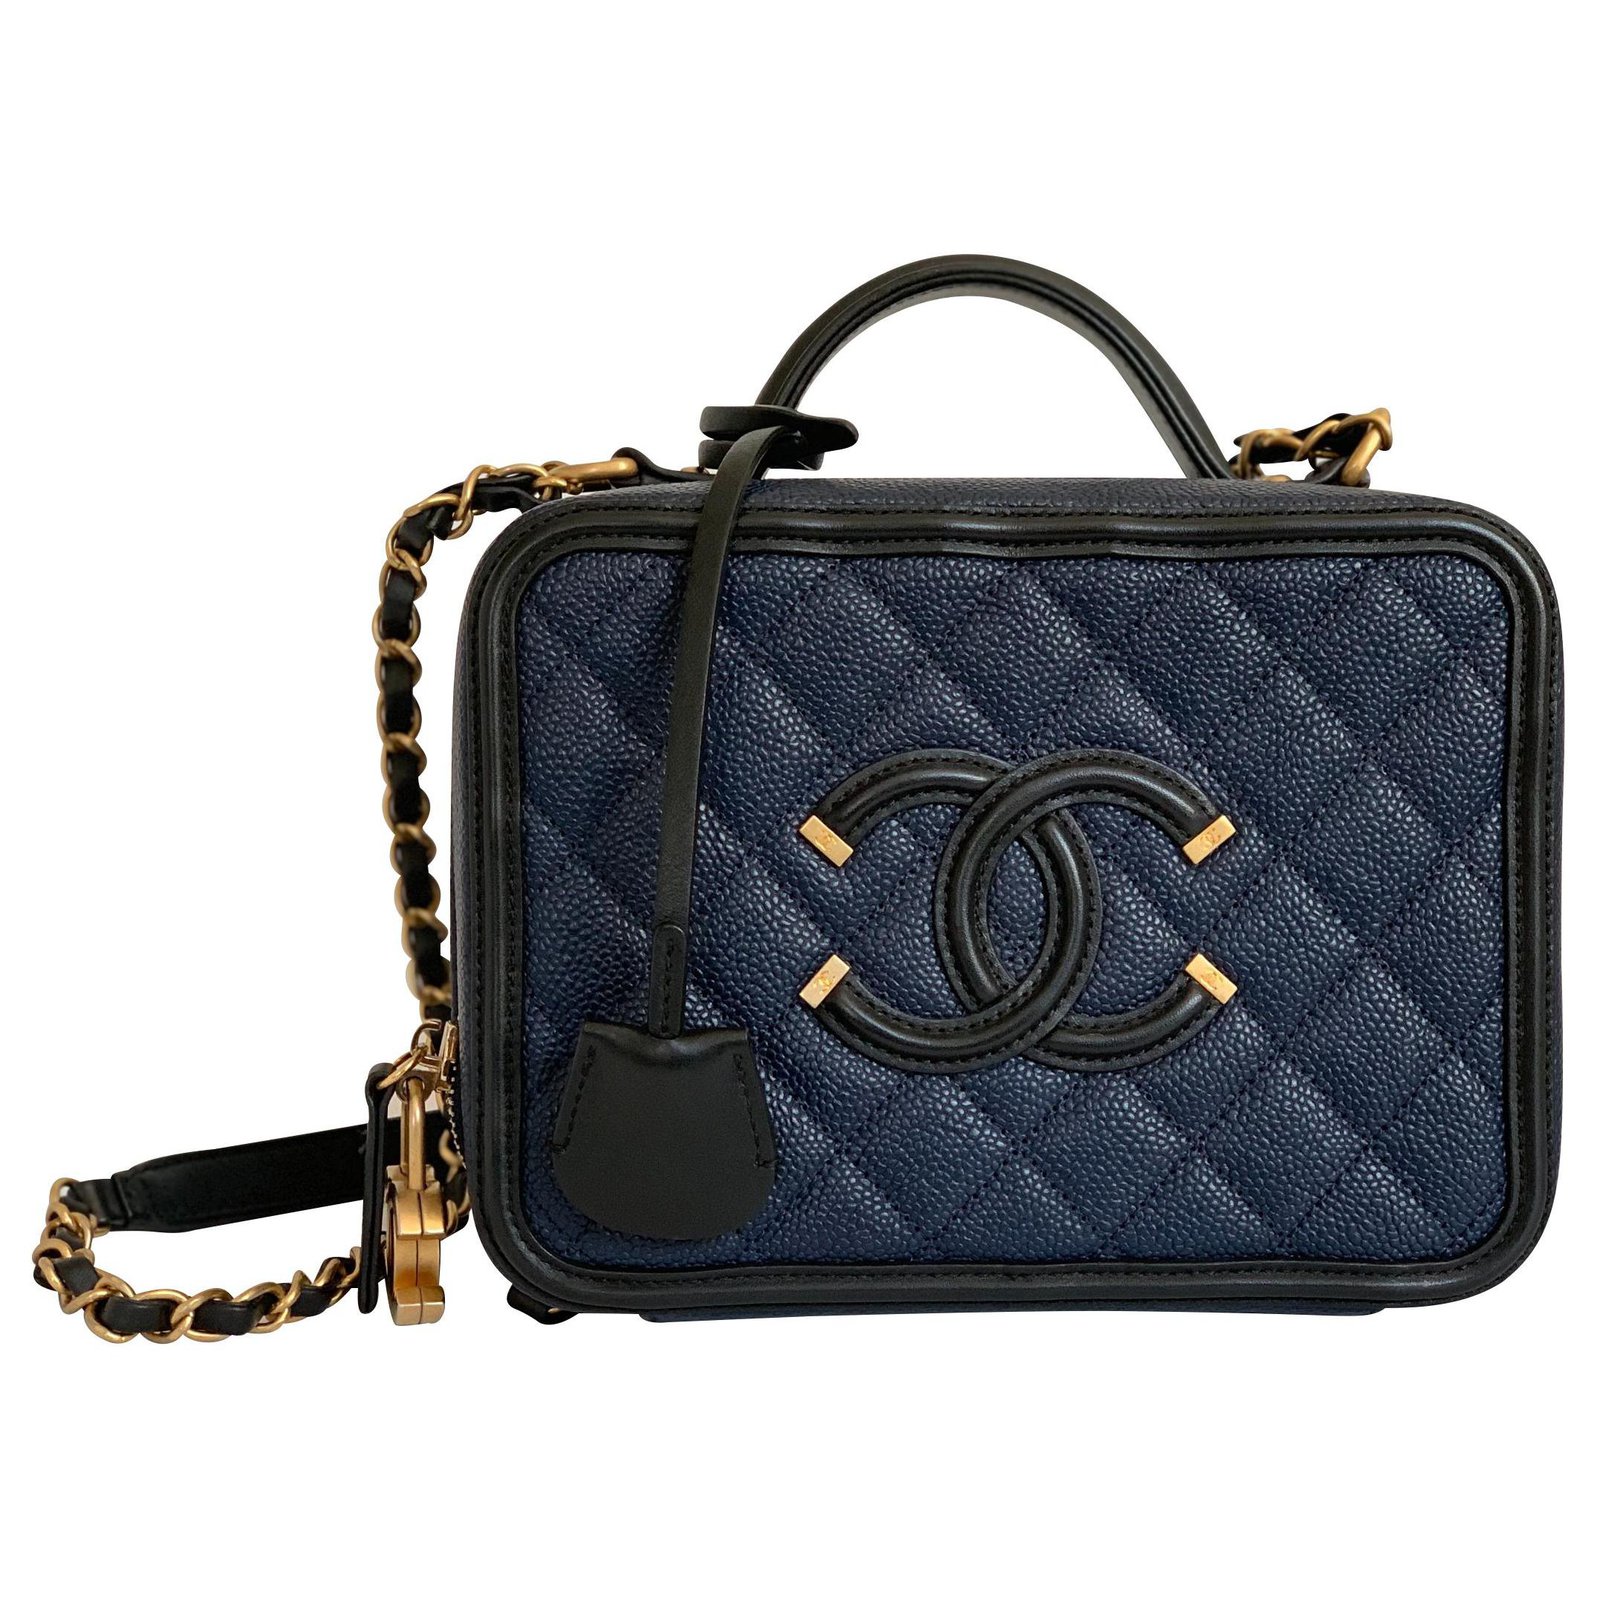 Timeless/classique leather handbag Chanel Blue in Leather - 33627620